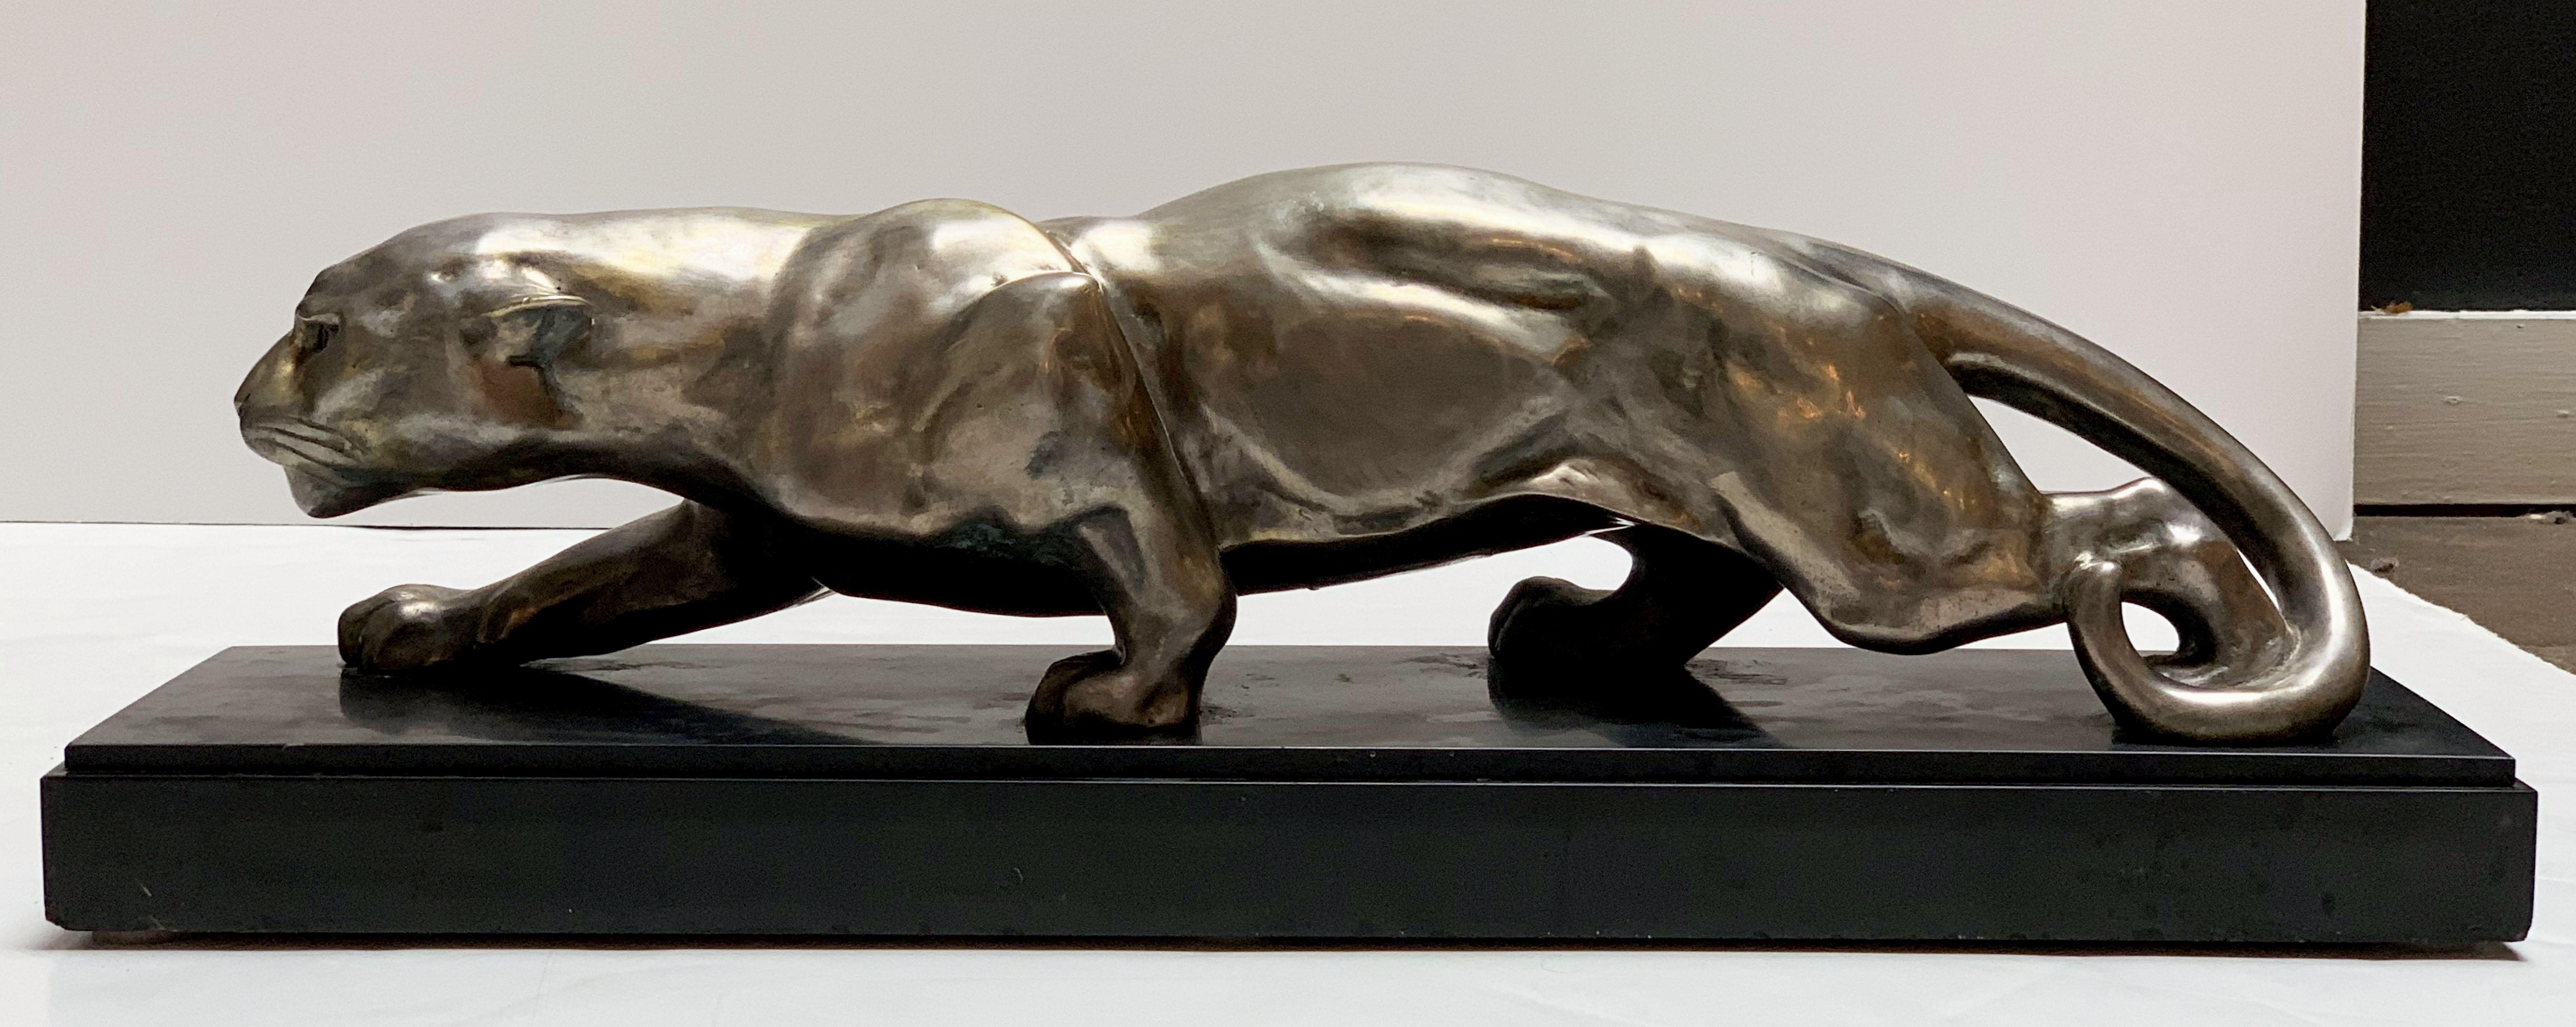 A fine French silvered bronze sculpture, from the Art Deco period of a stalking panther mounted to a rectangular black marble plinth base.
Marked bronze on foot. Signed Deslin on marble base.